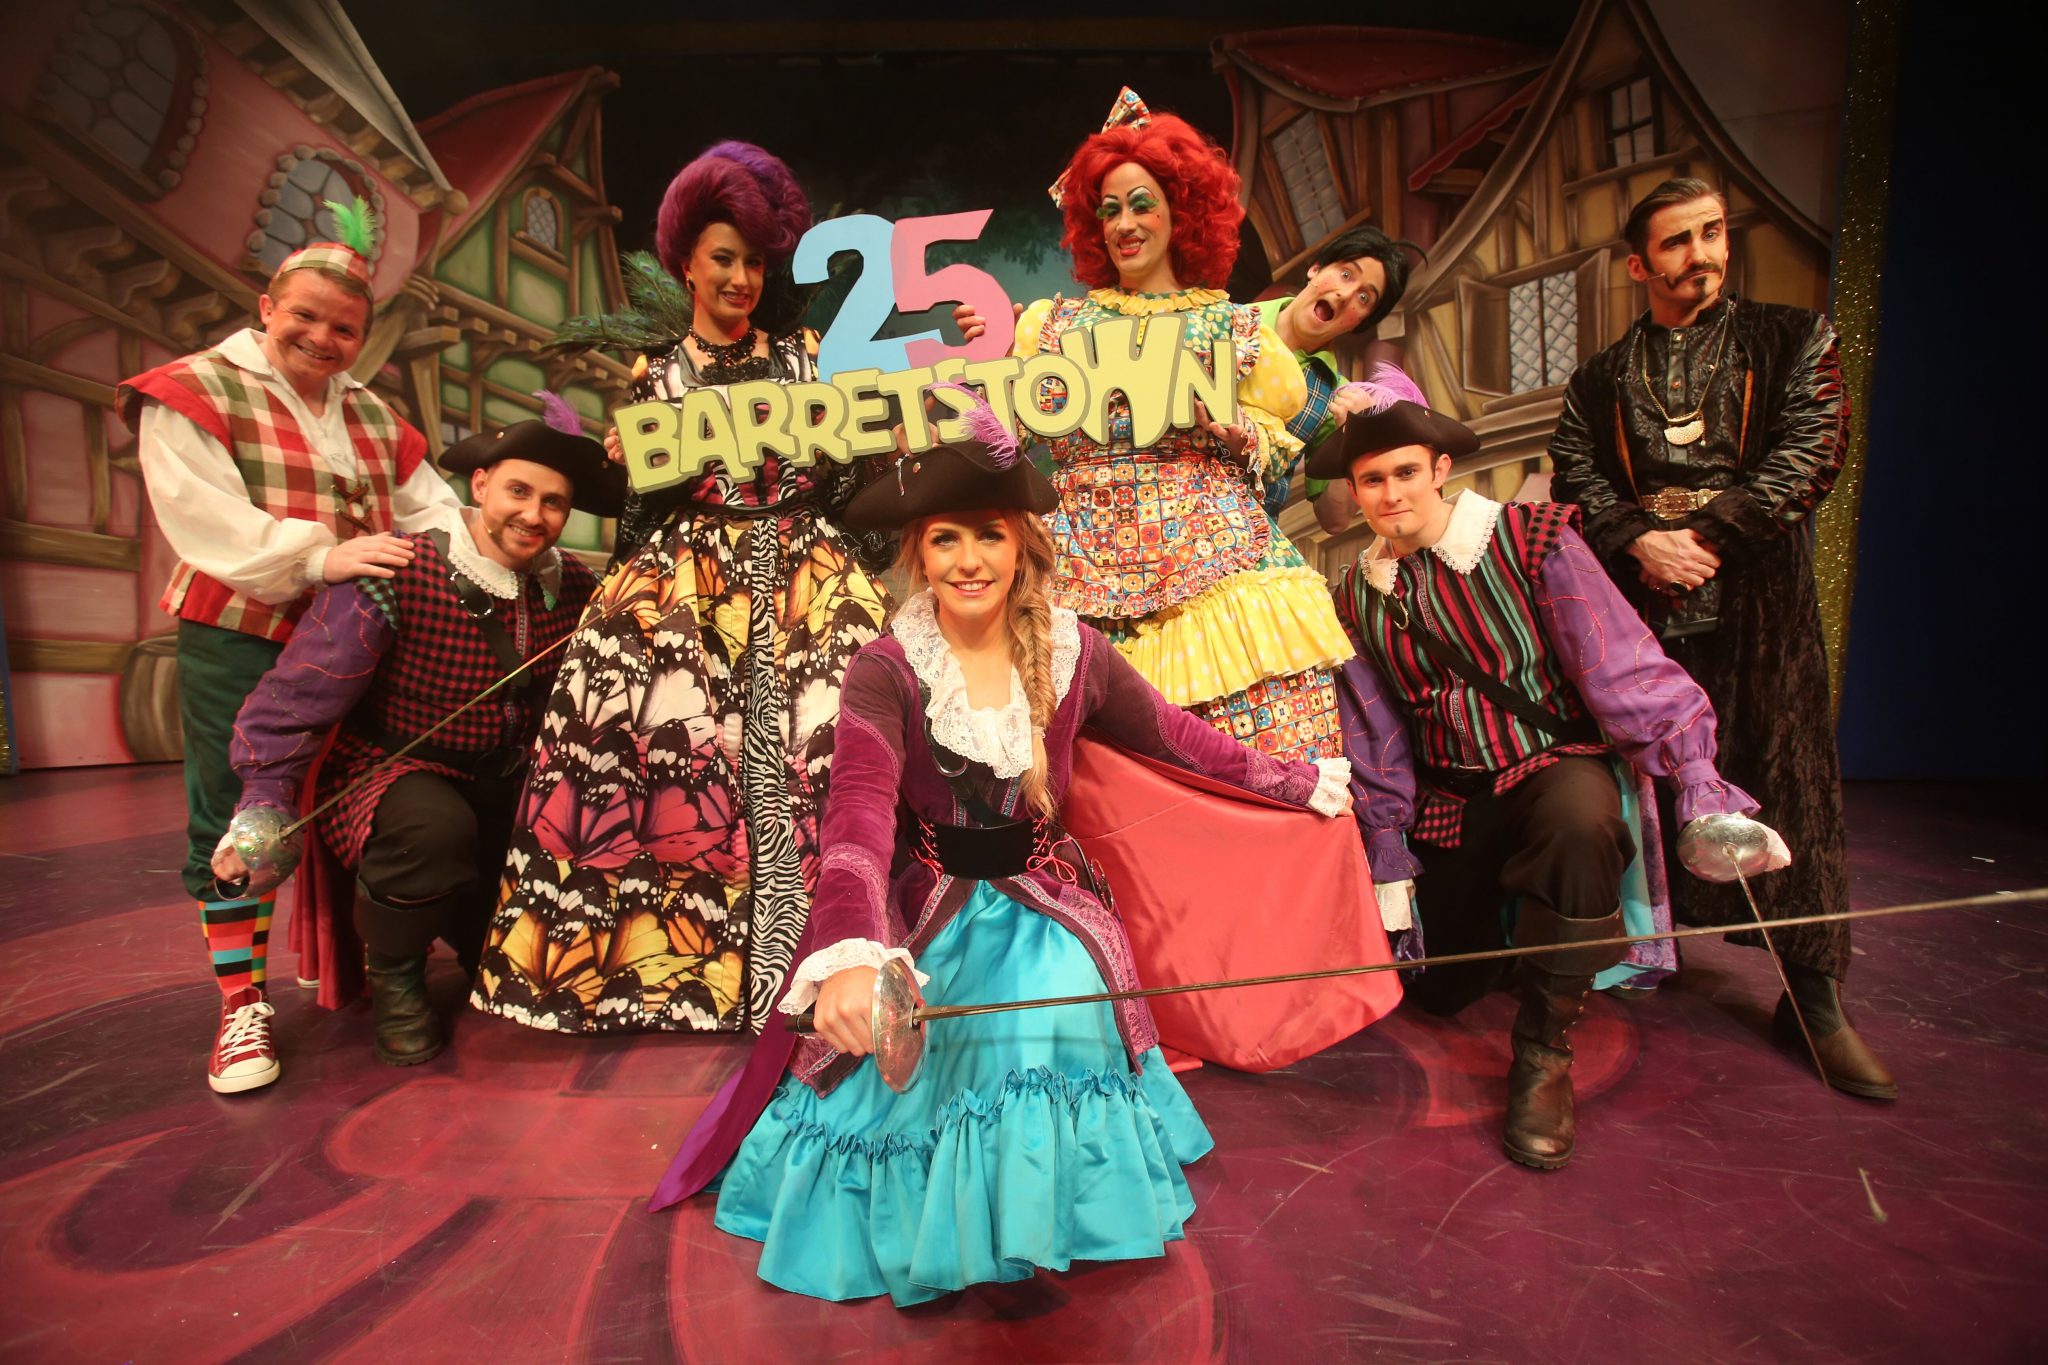 Helix Panto will hold special show in aid of Barretstown Children’s Charity